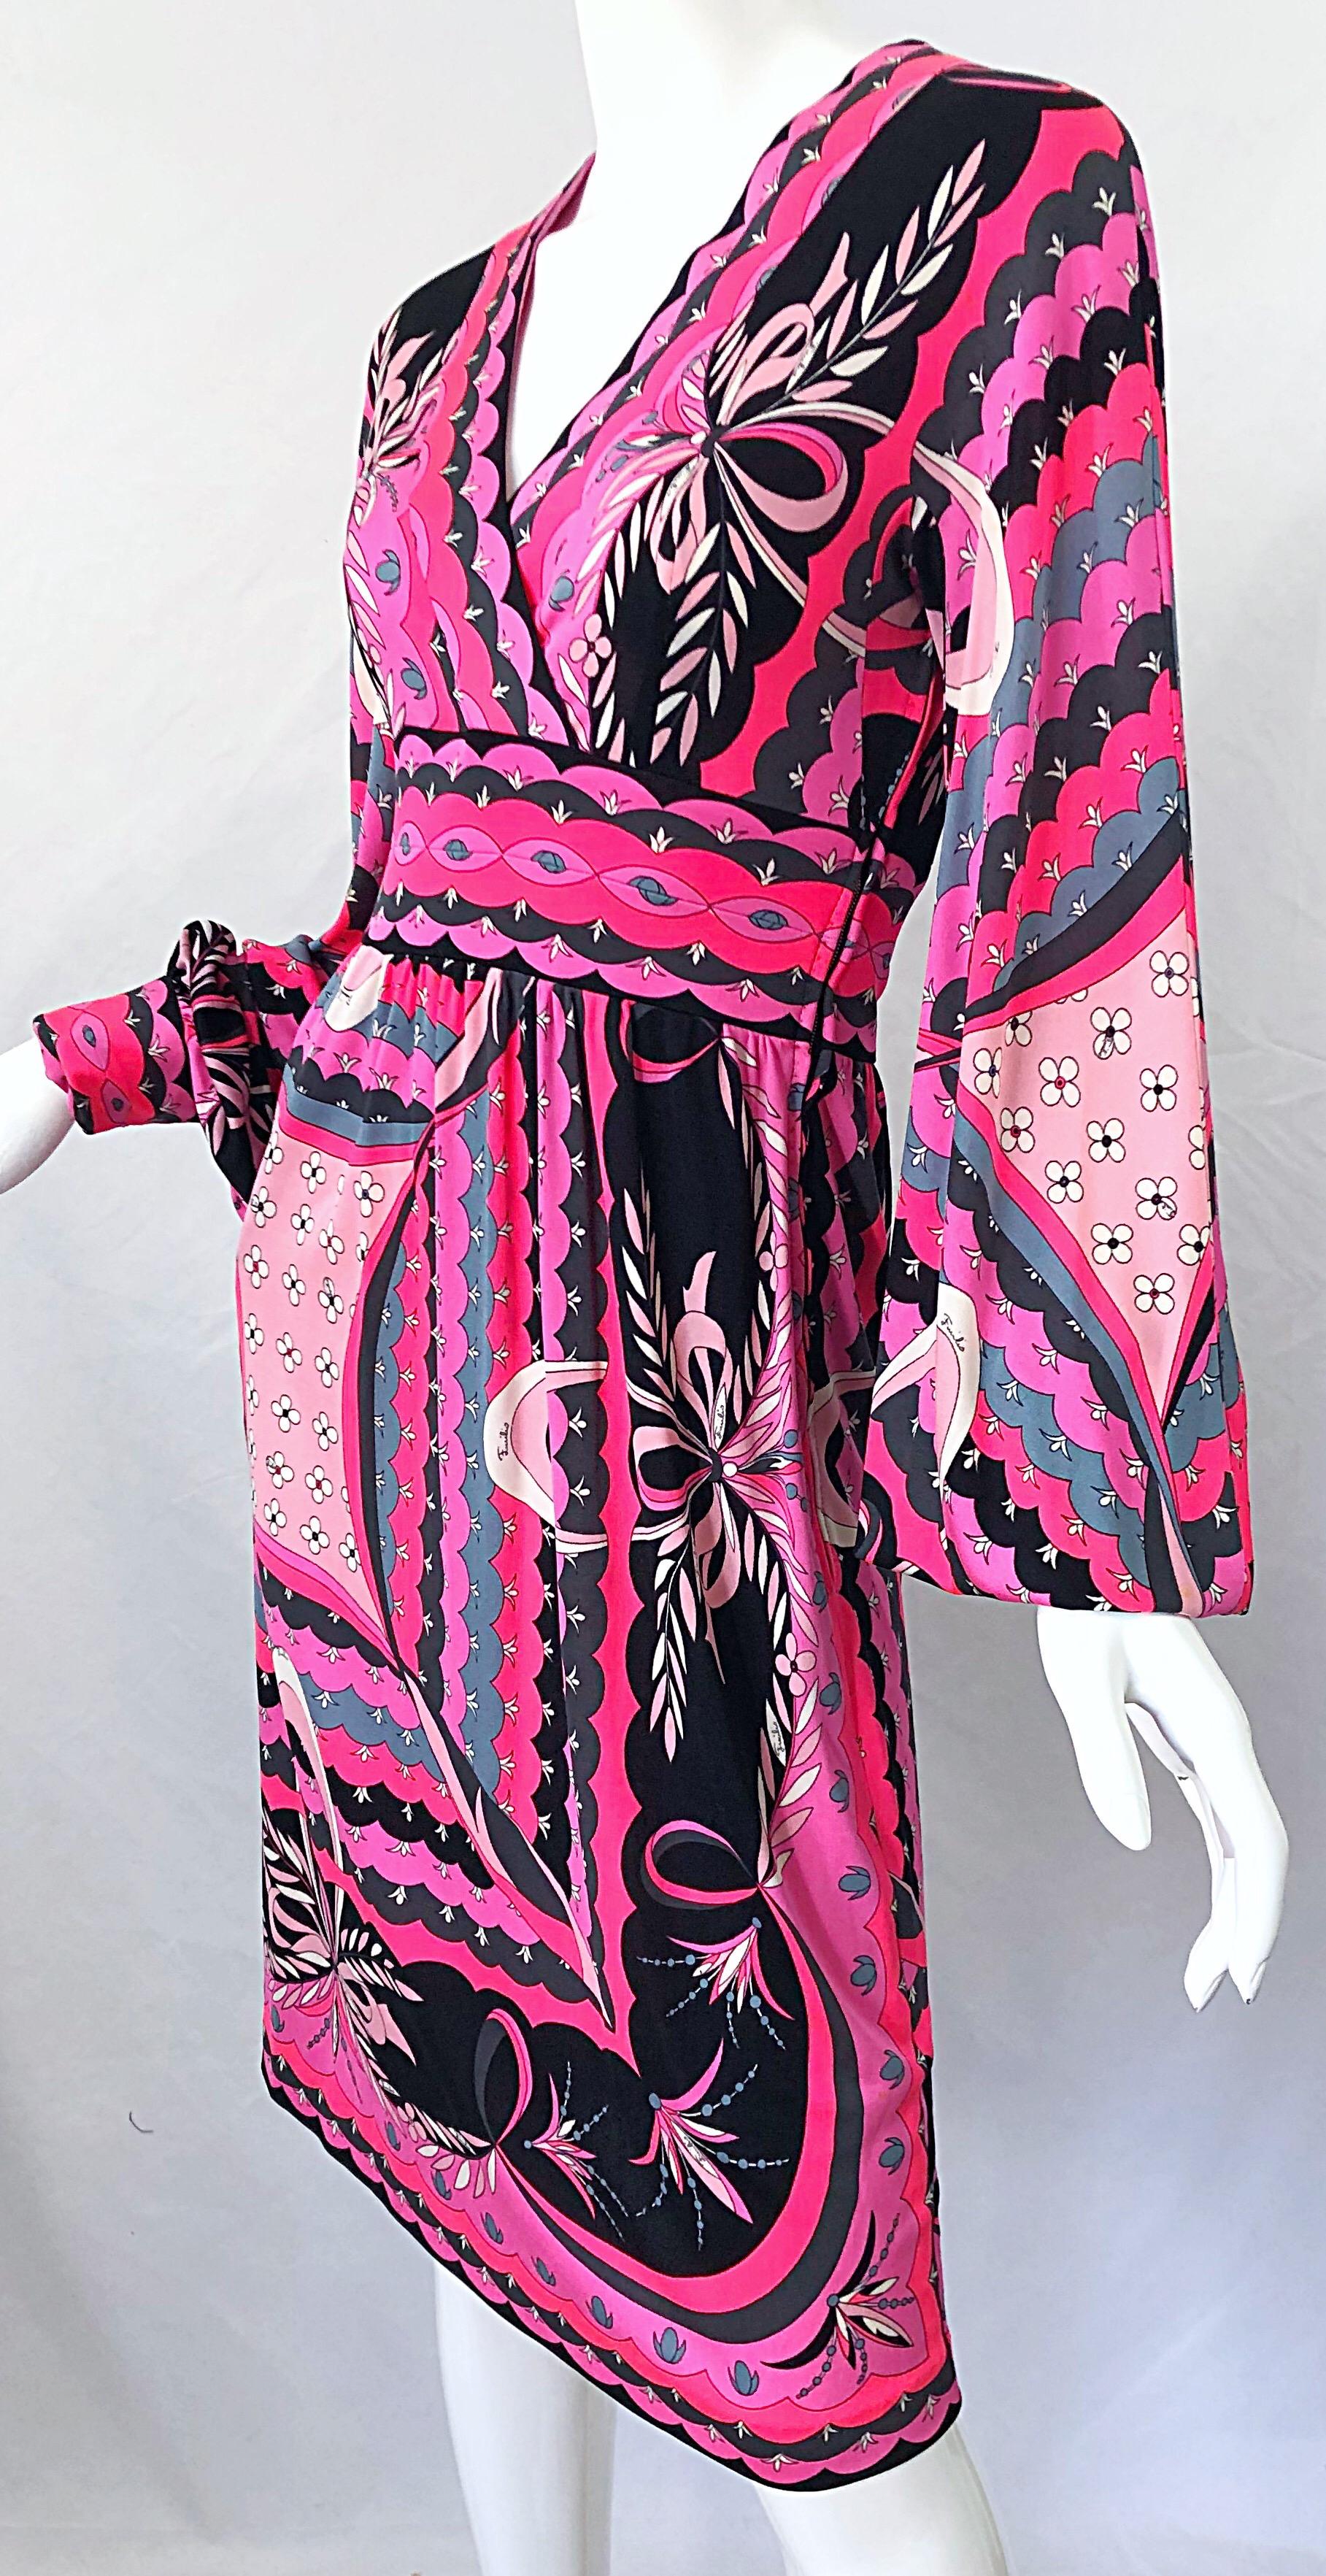 1970s Emilio Pucci Silk Jersey Hot Pink Long Sleeve Vintage 70s Dress For Sale 4